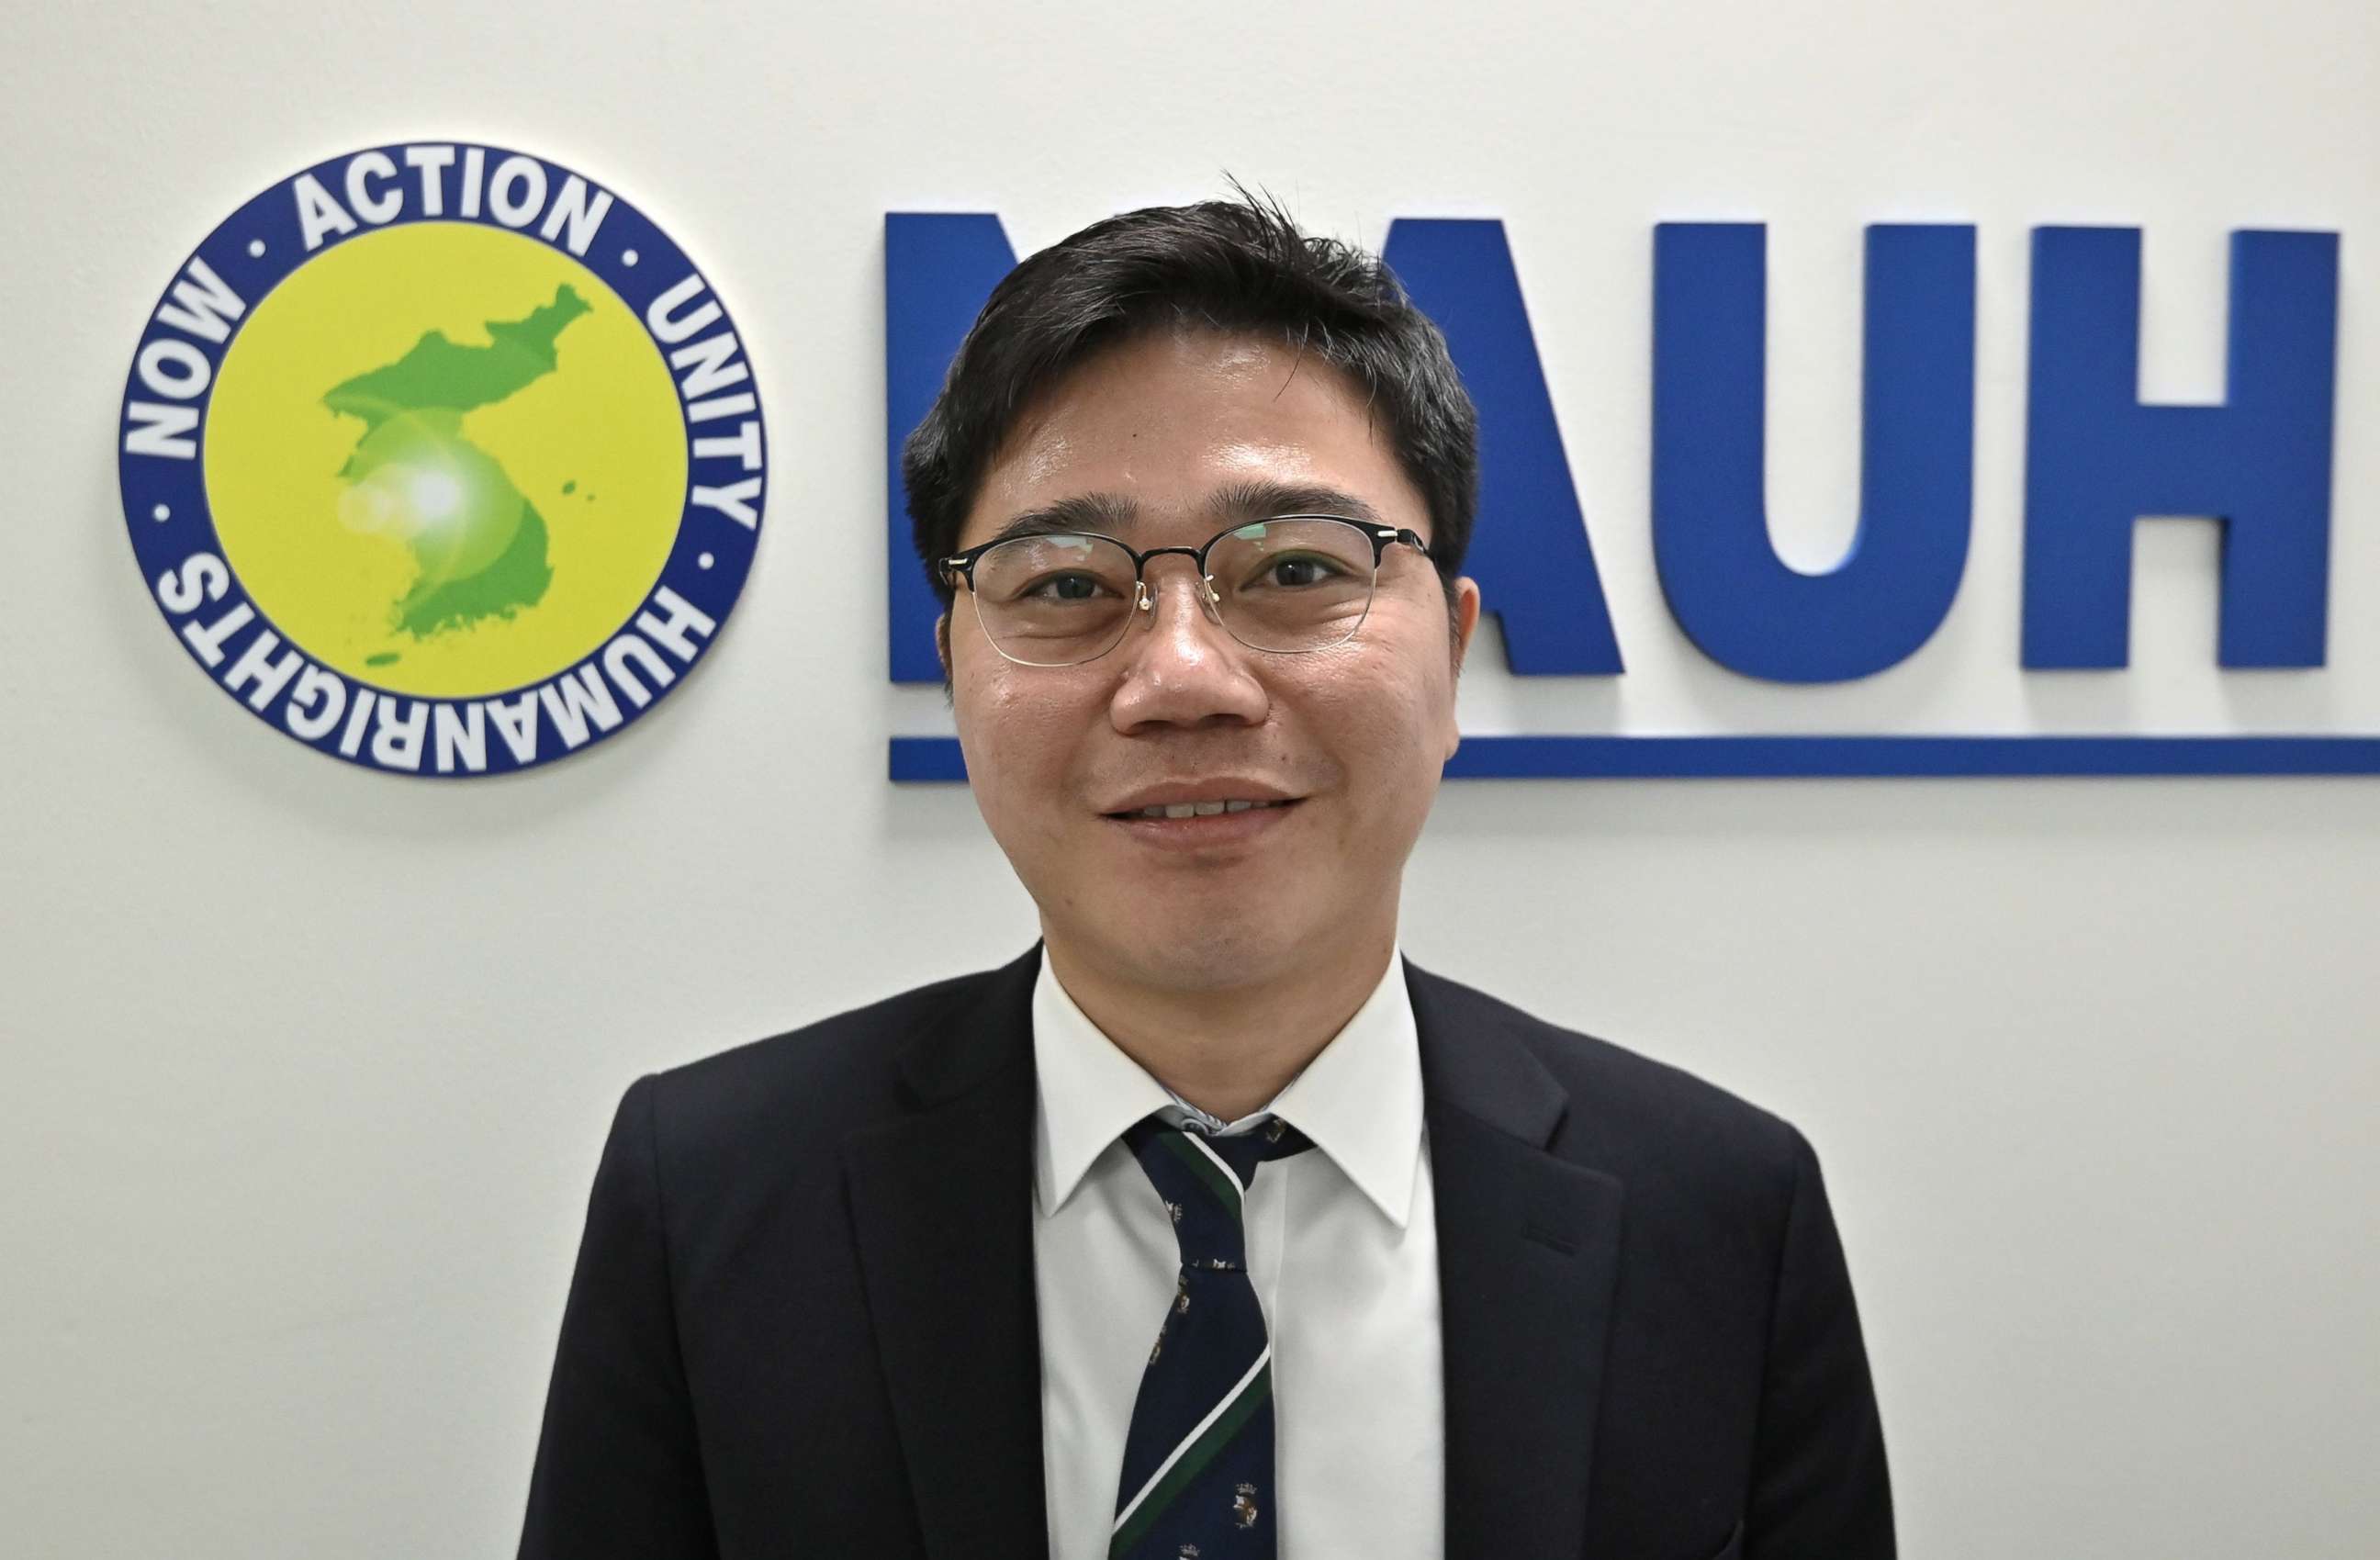 PHOTO: This picture taken on March 24, 2020 shows North Korean defector and human rights activist Ji Seong-ho, who is running for a proportional representation seat for South Korea's main opposition United Future Party, posing at his office in Seoul.